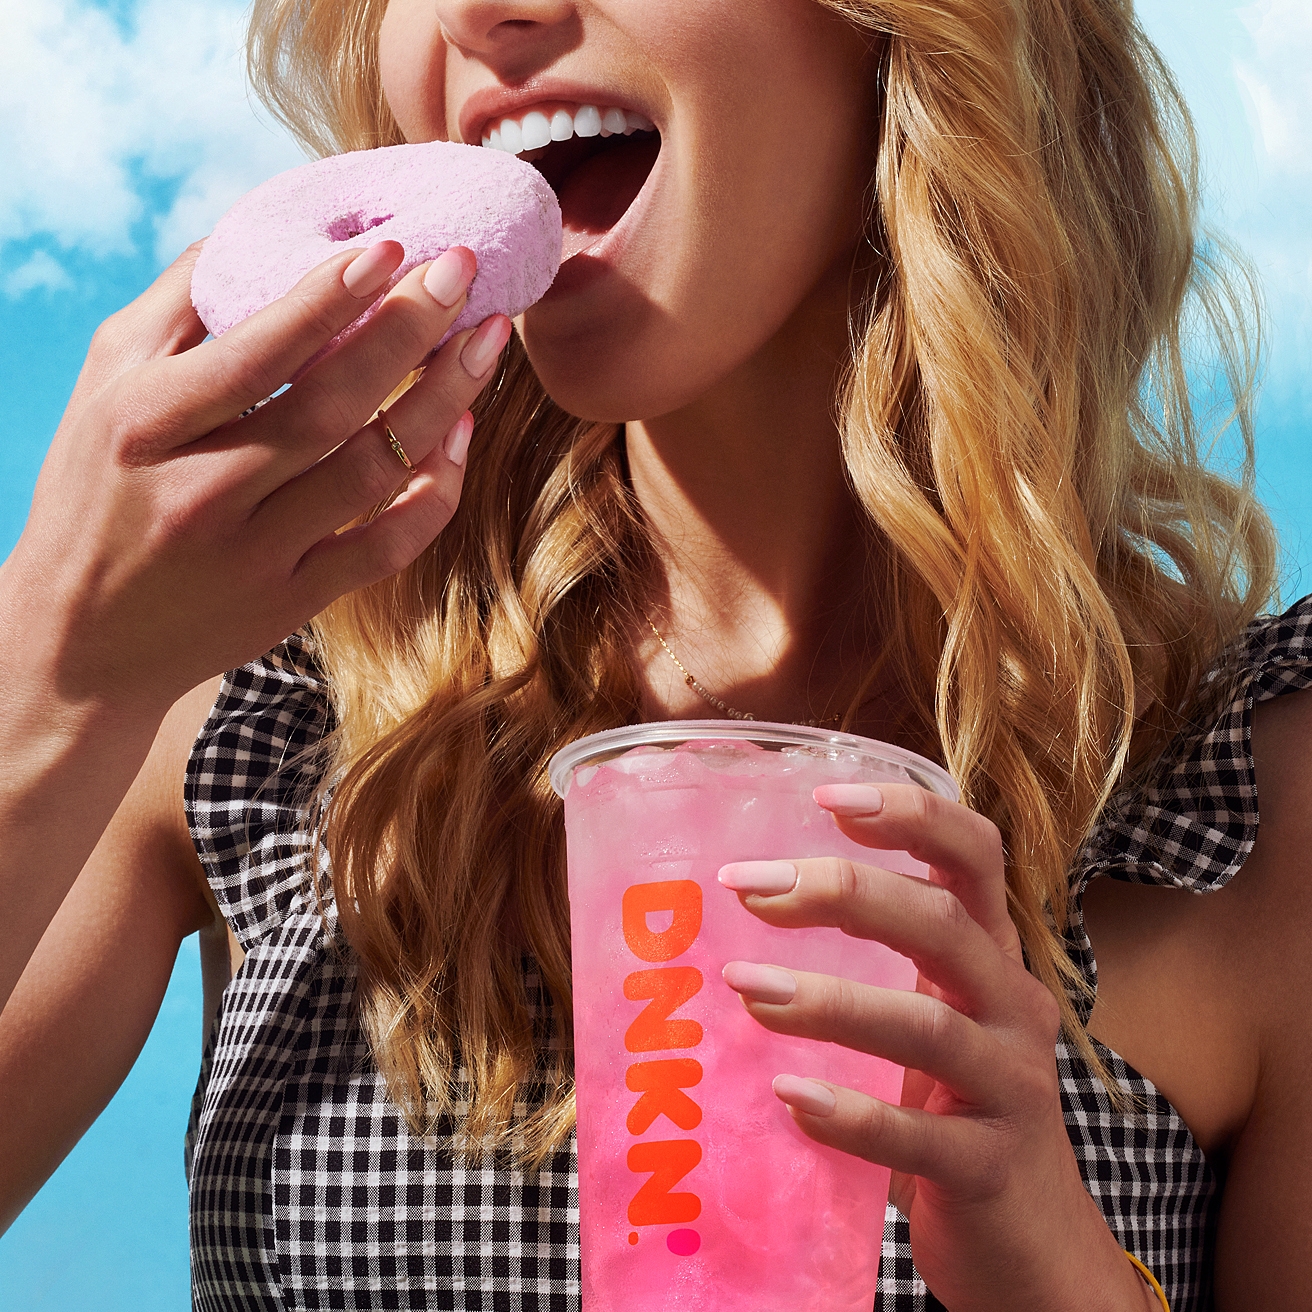 Dunkin' donut deals for National Donut Day